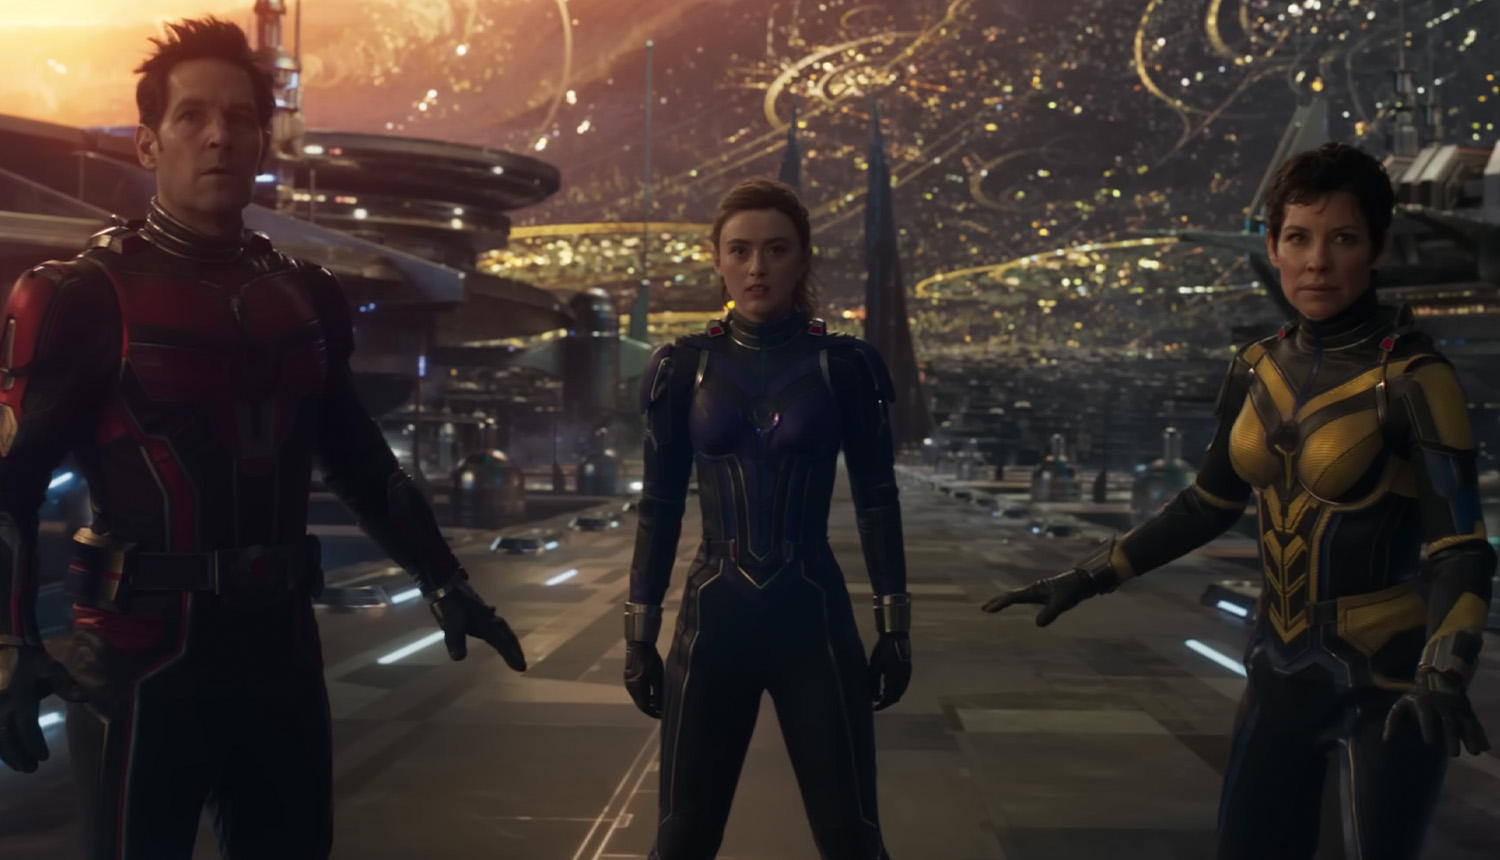 The Avengers: Endgame Cast Was Lied To About the Movie's Most